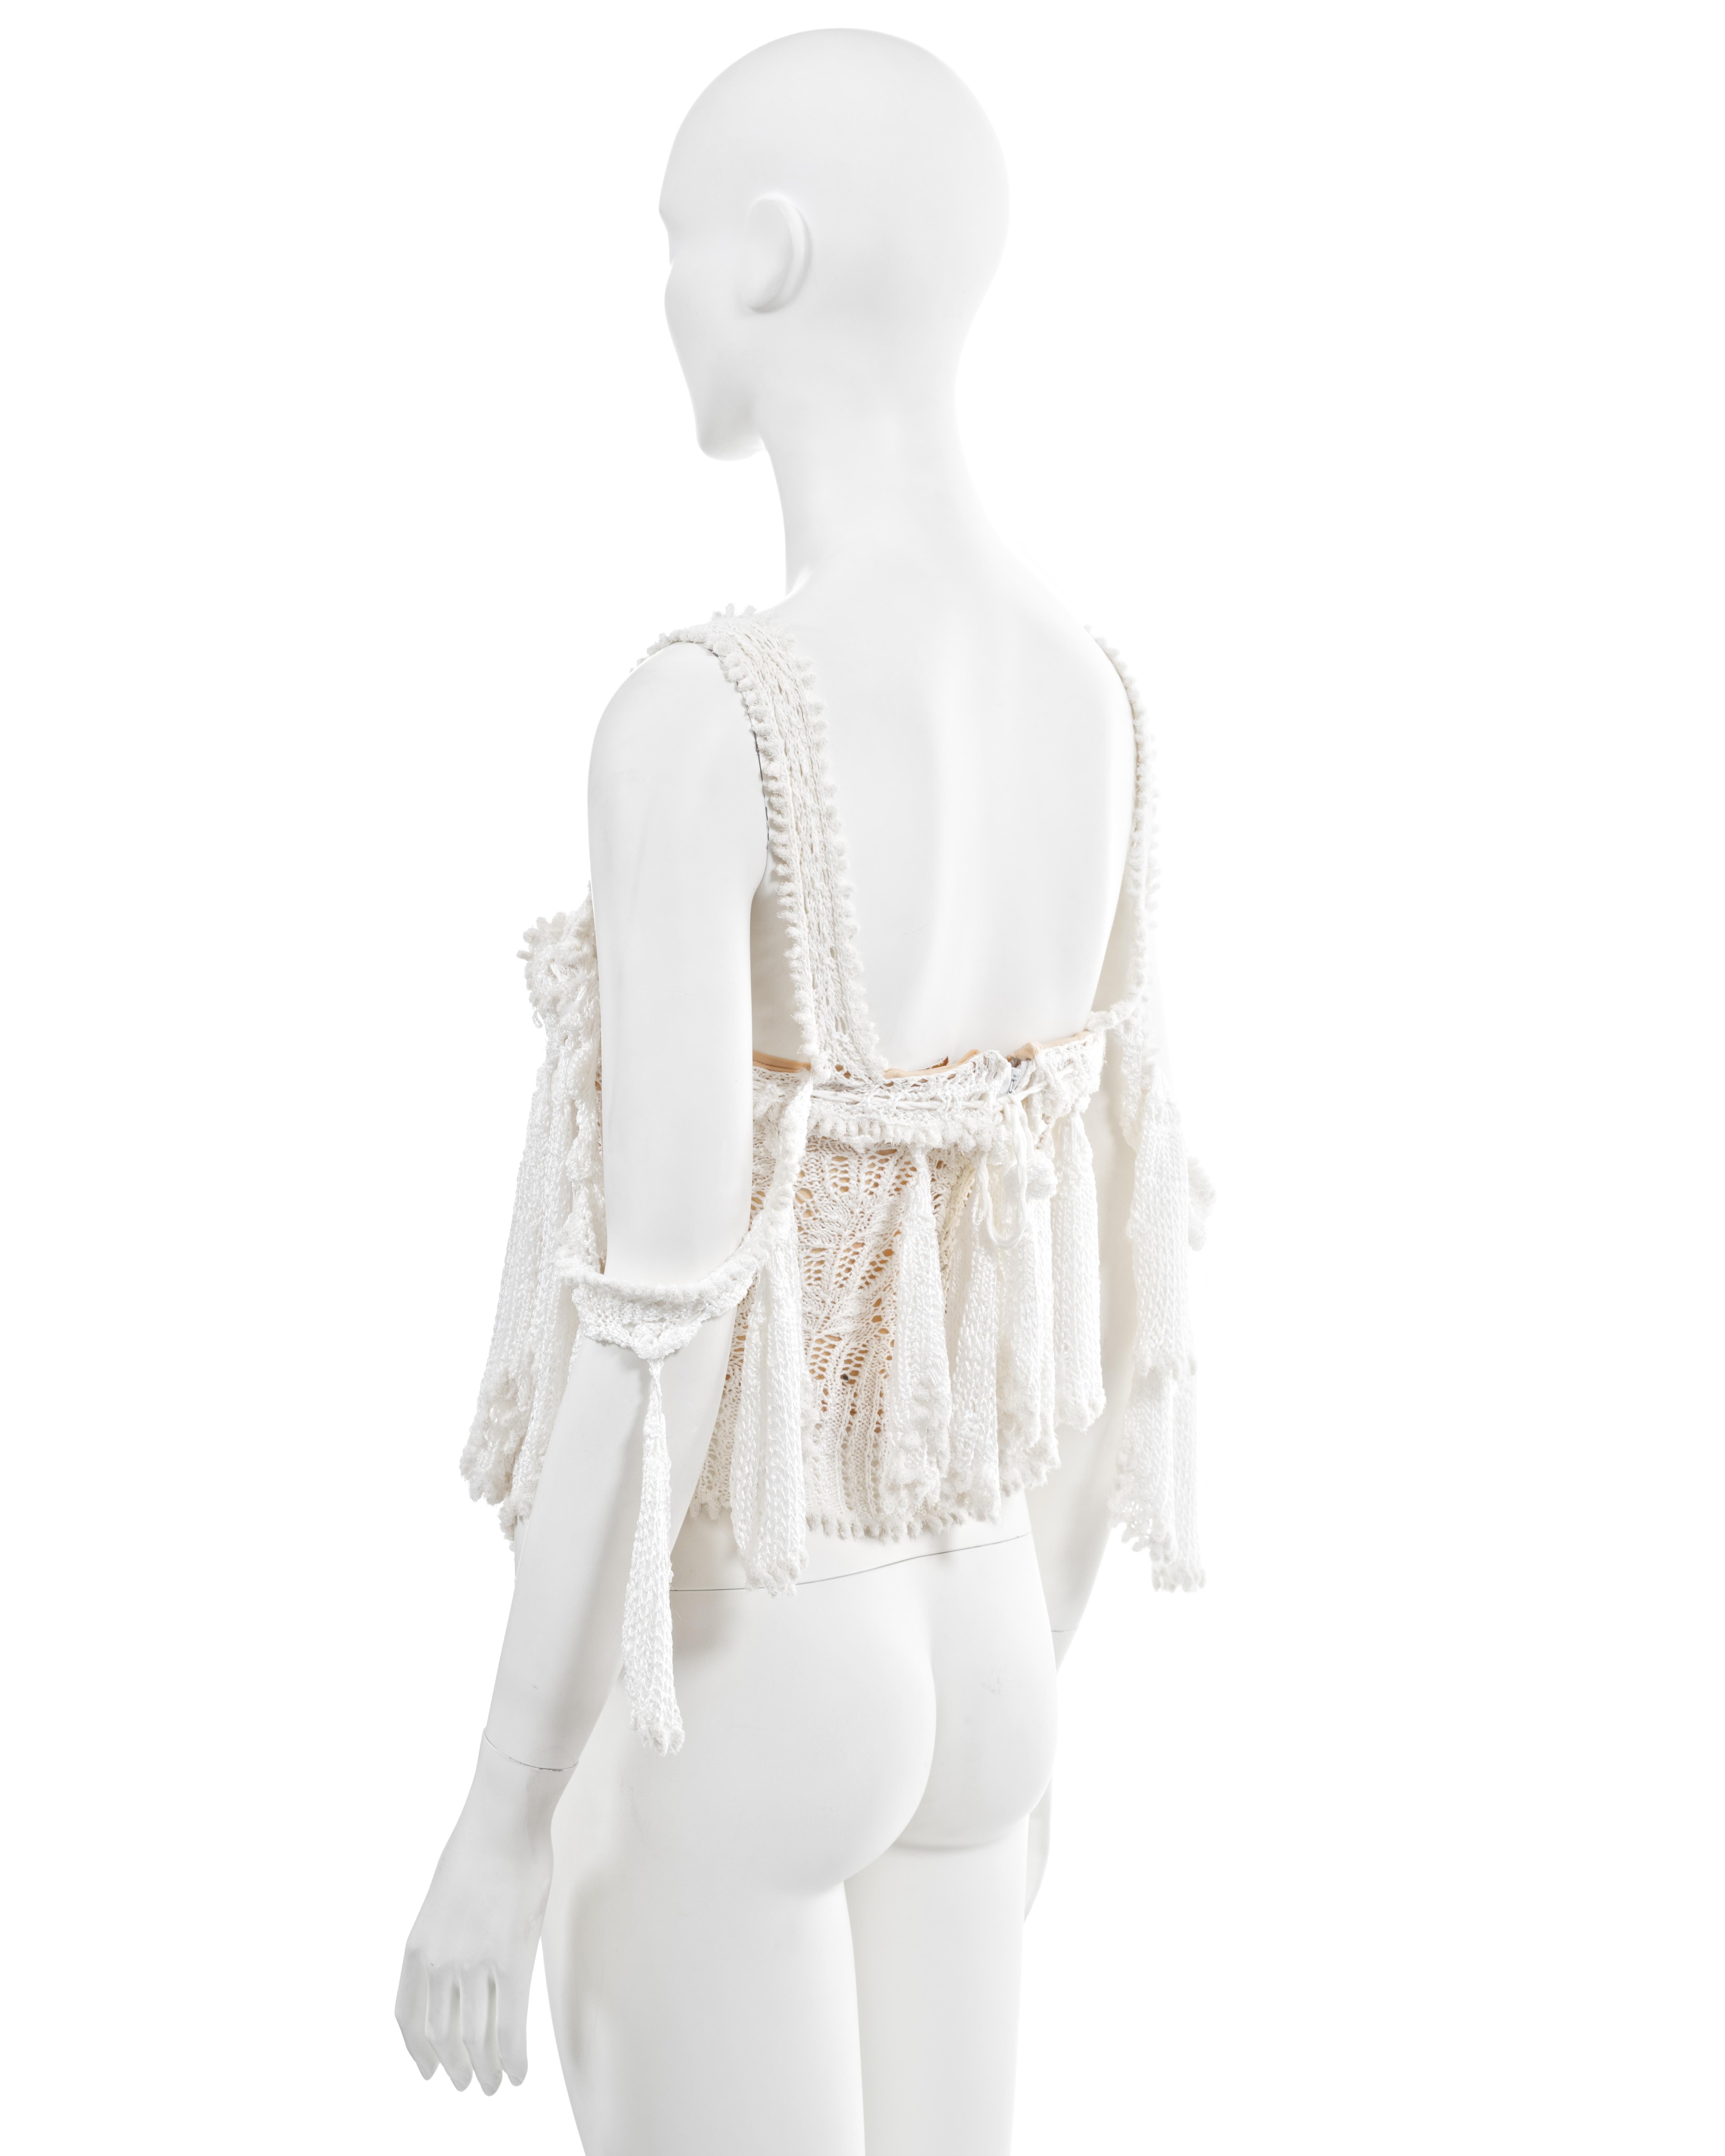 Vivienne Westwood 'Cafe Society' white knitted lace corset, ss 1994 For Sale 6